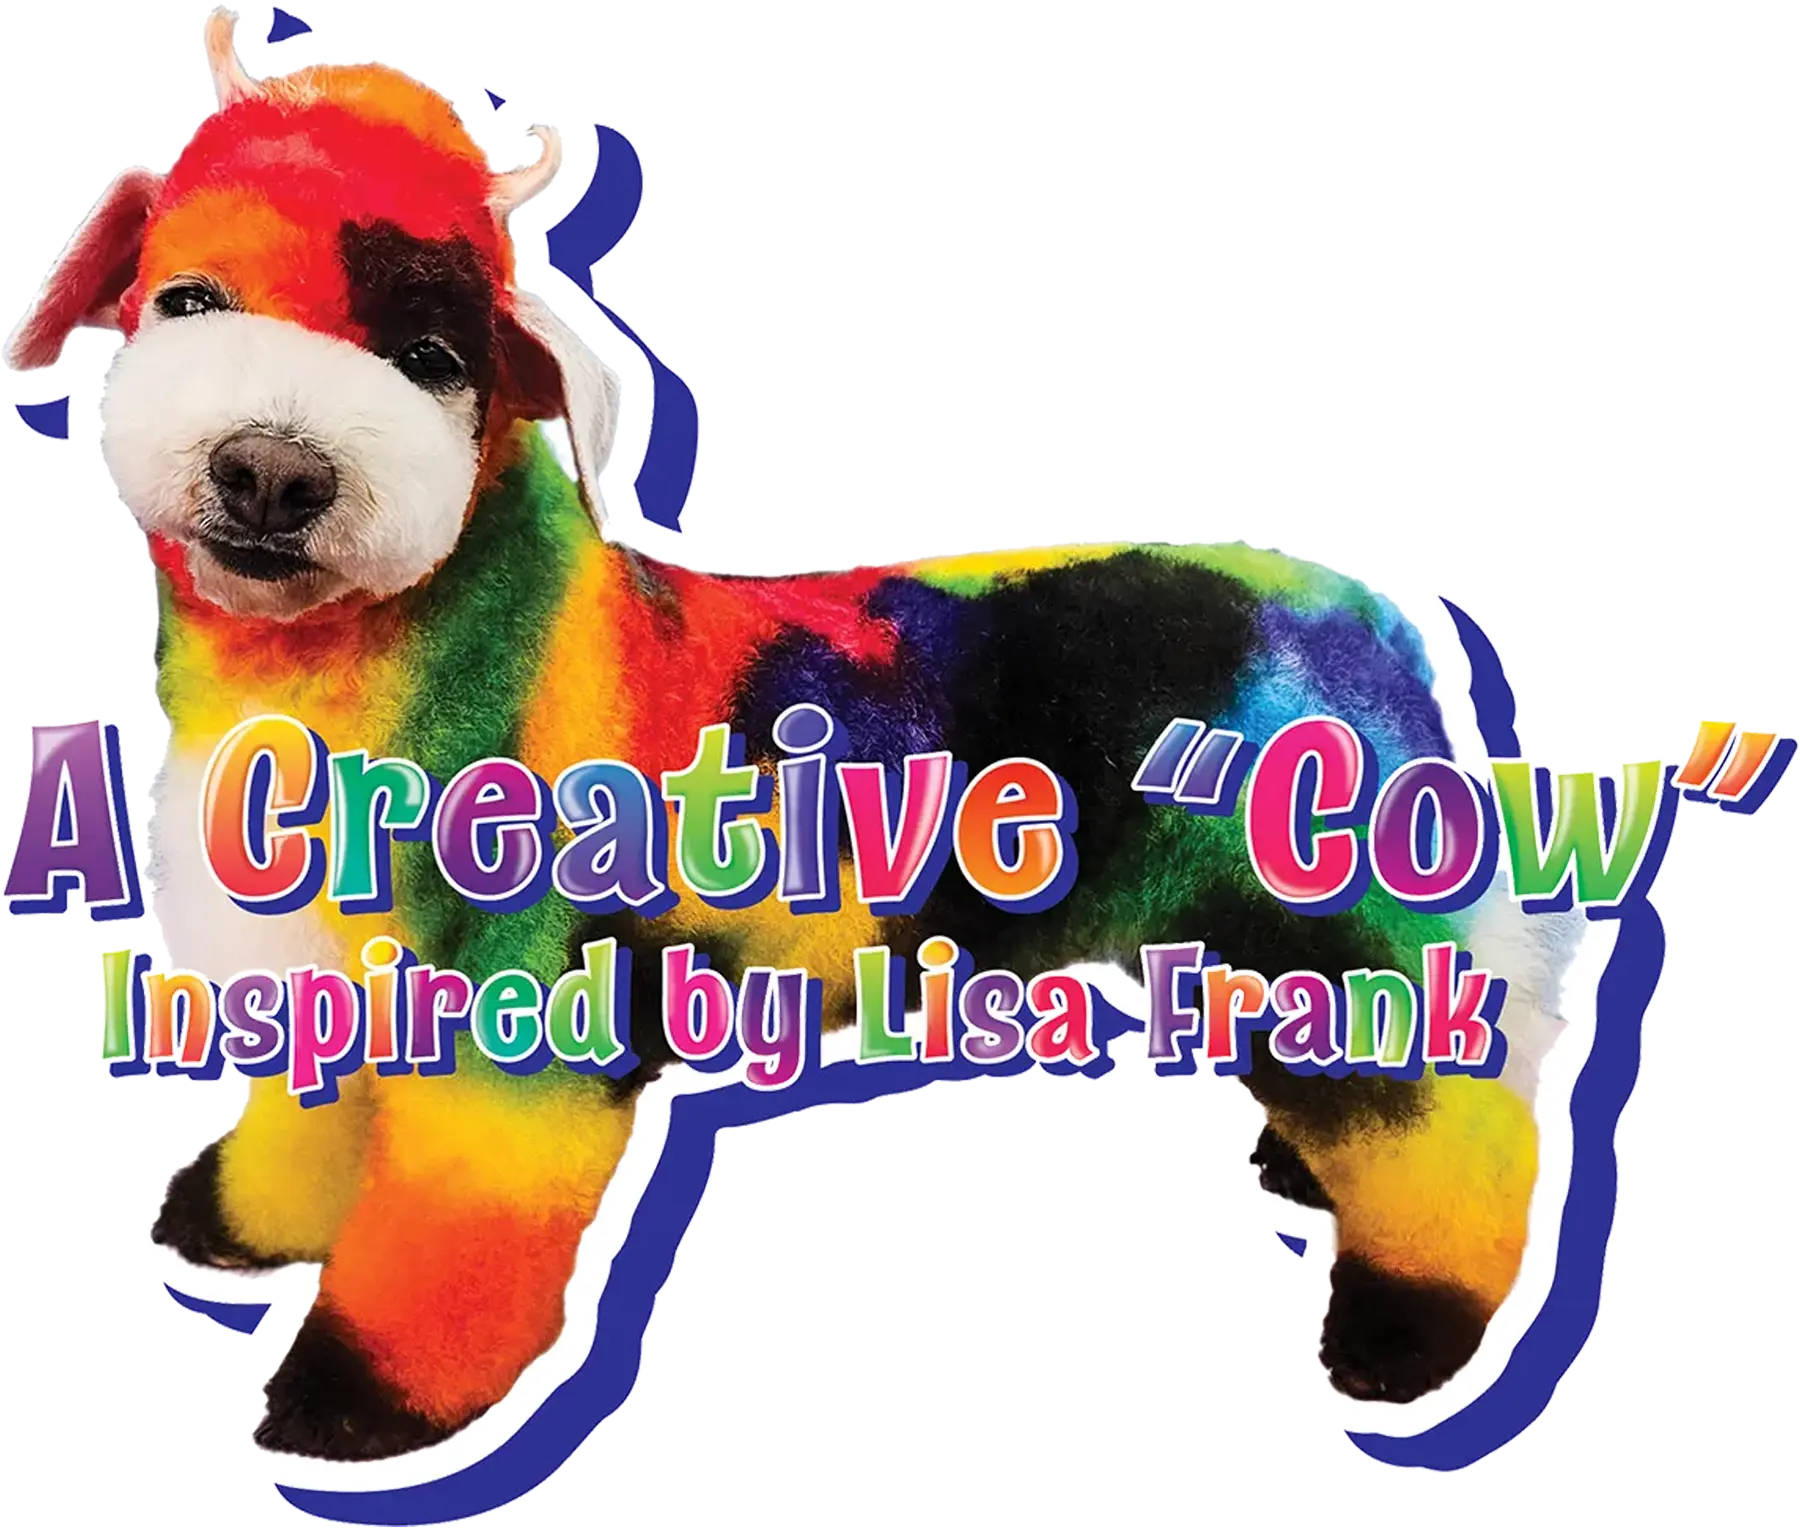 A Creative "Cow" Inspired by Lisa Frank